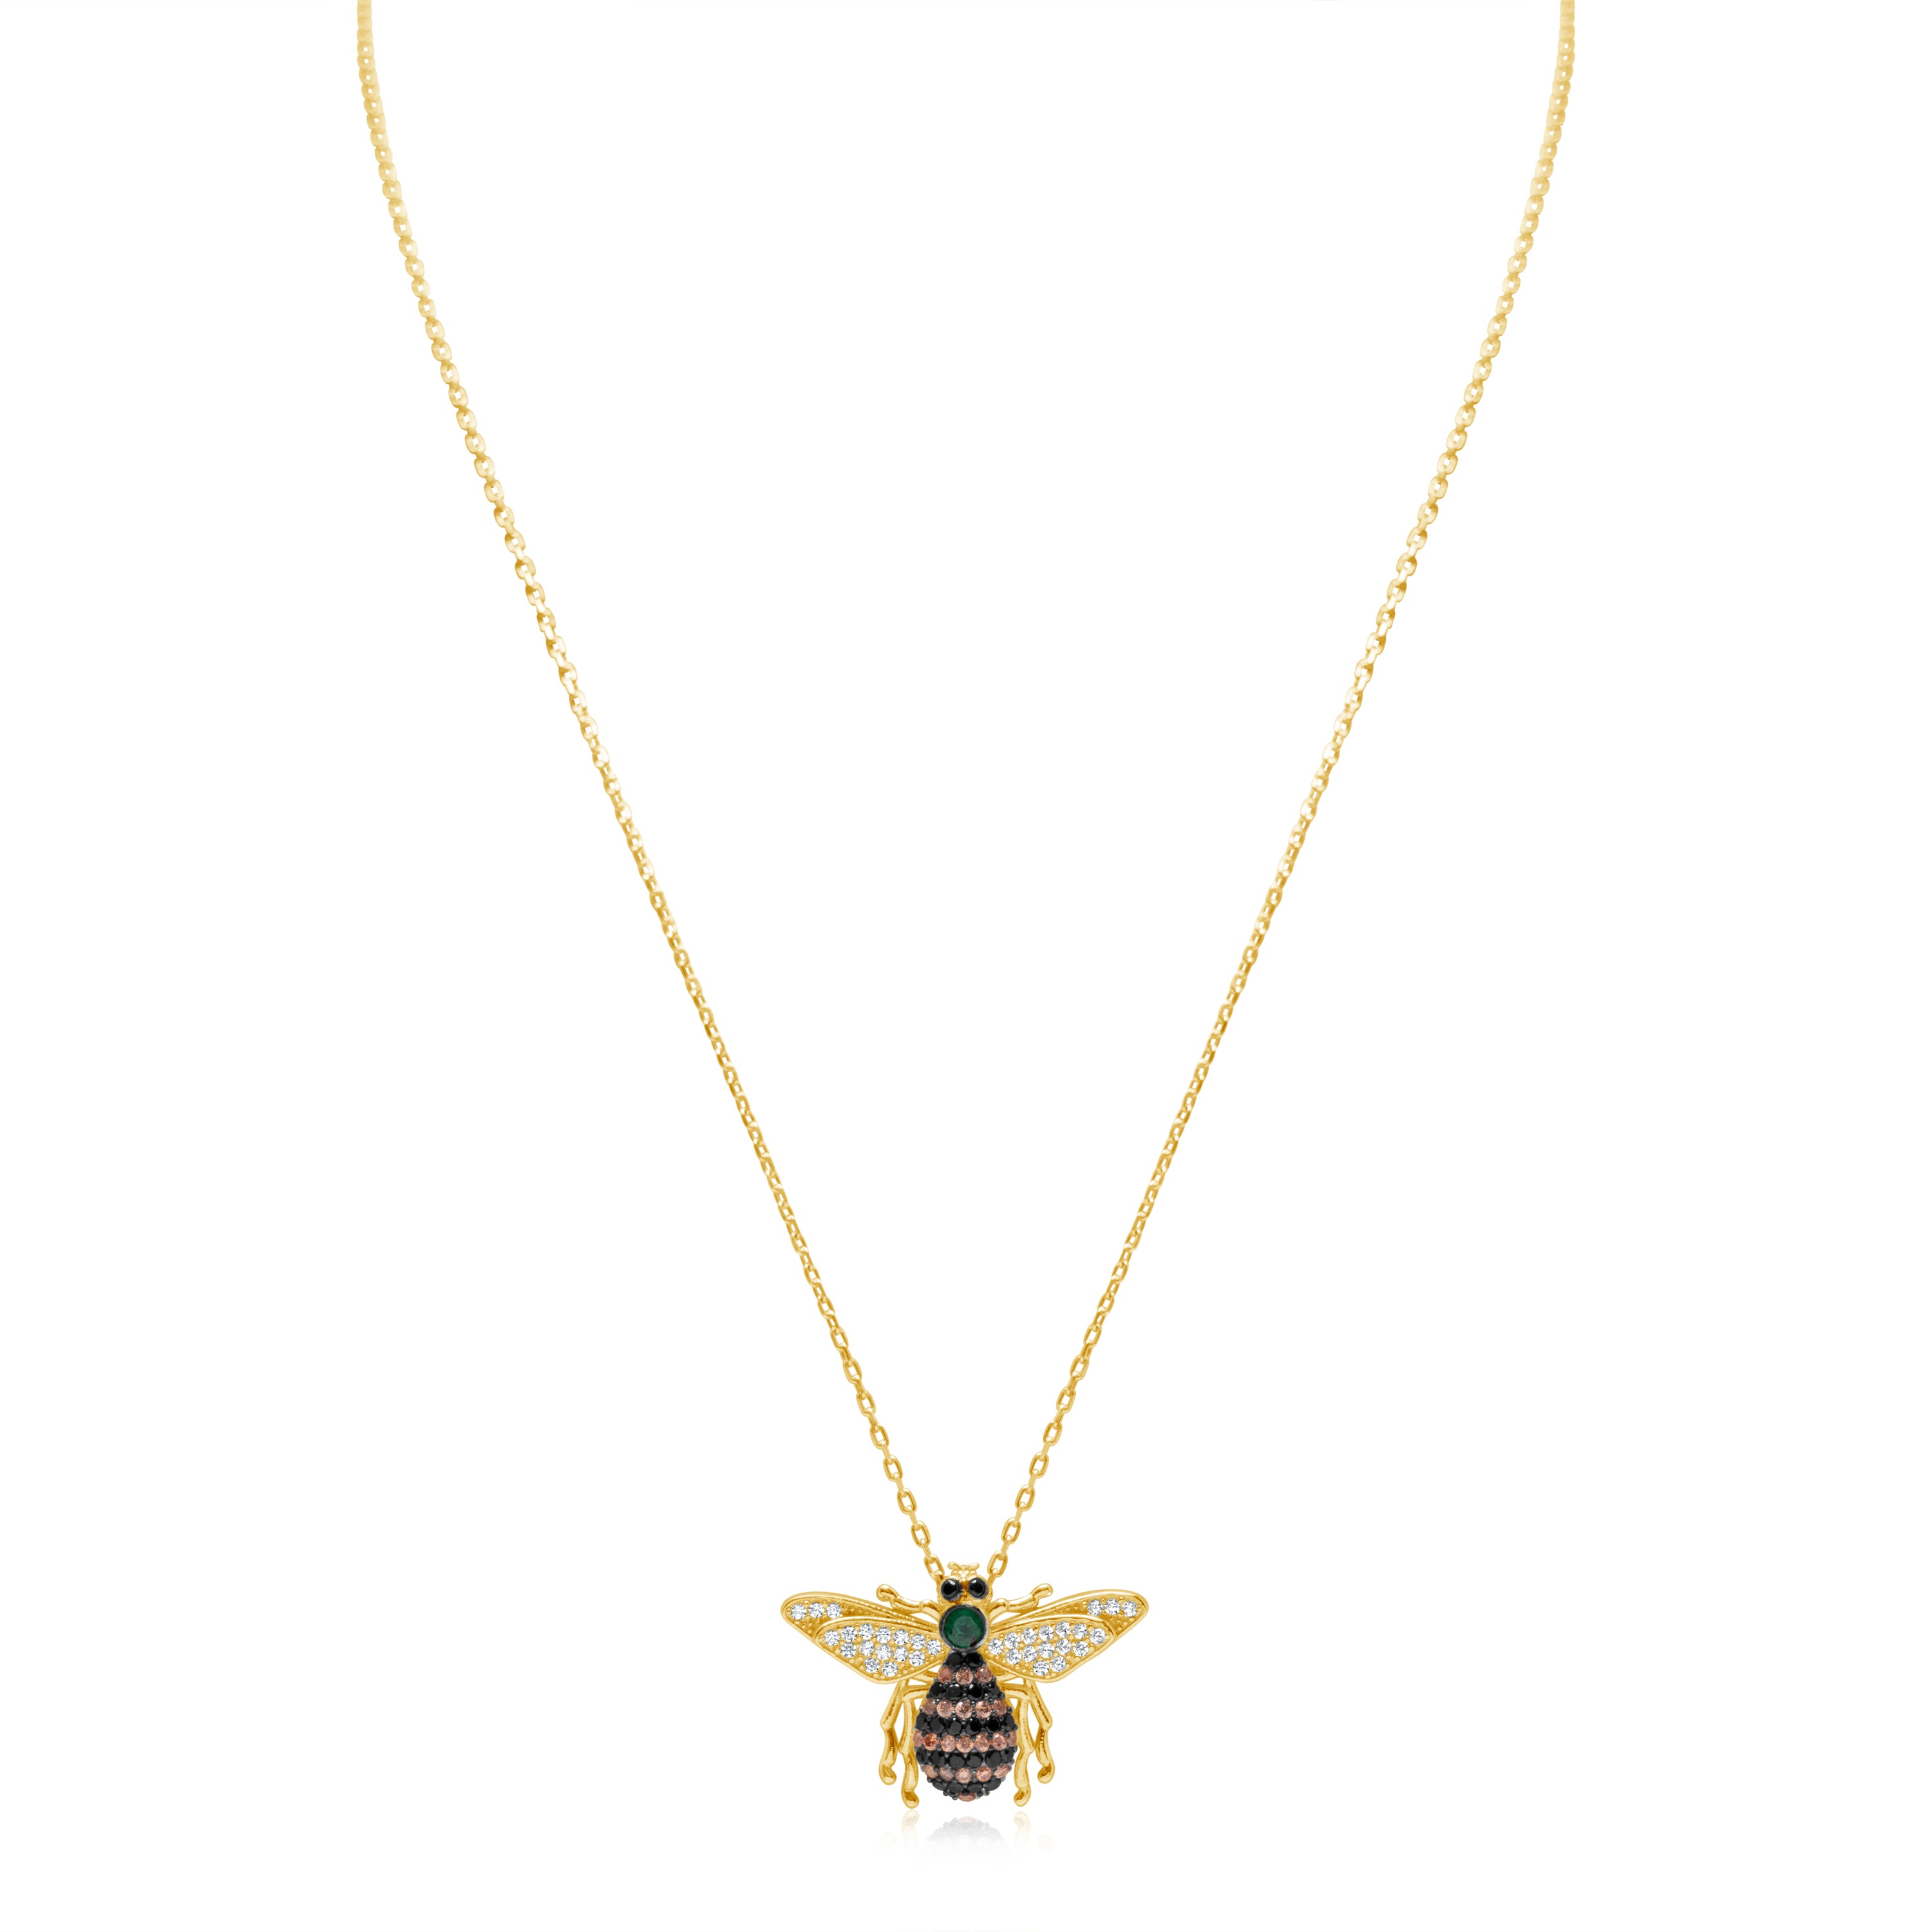 AND MARY Ceramic Jewellery Tiny Bumble Bee Necklace with Silver Chain –  Sultan's Emporium